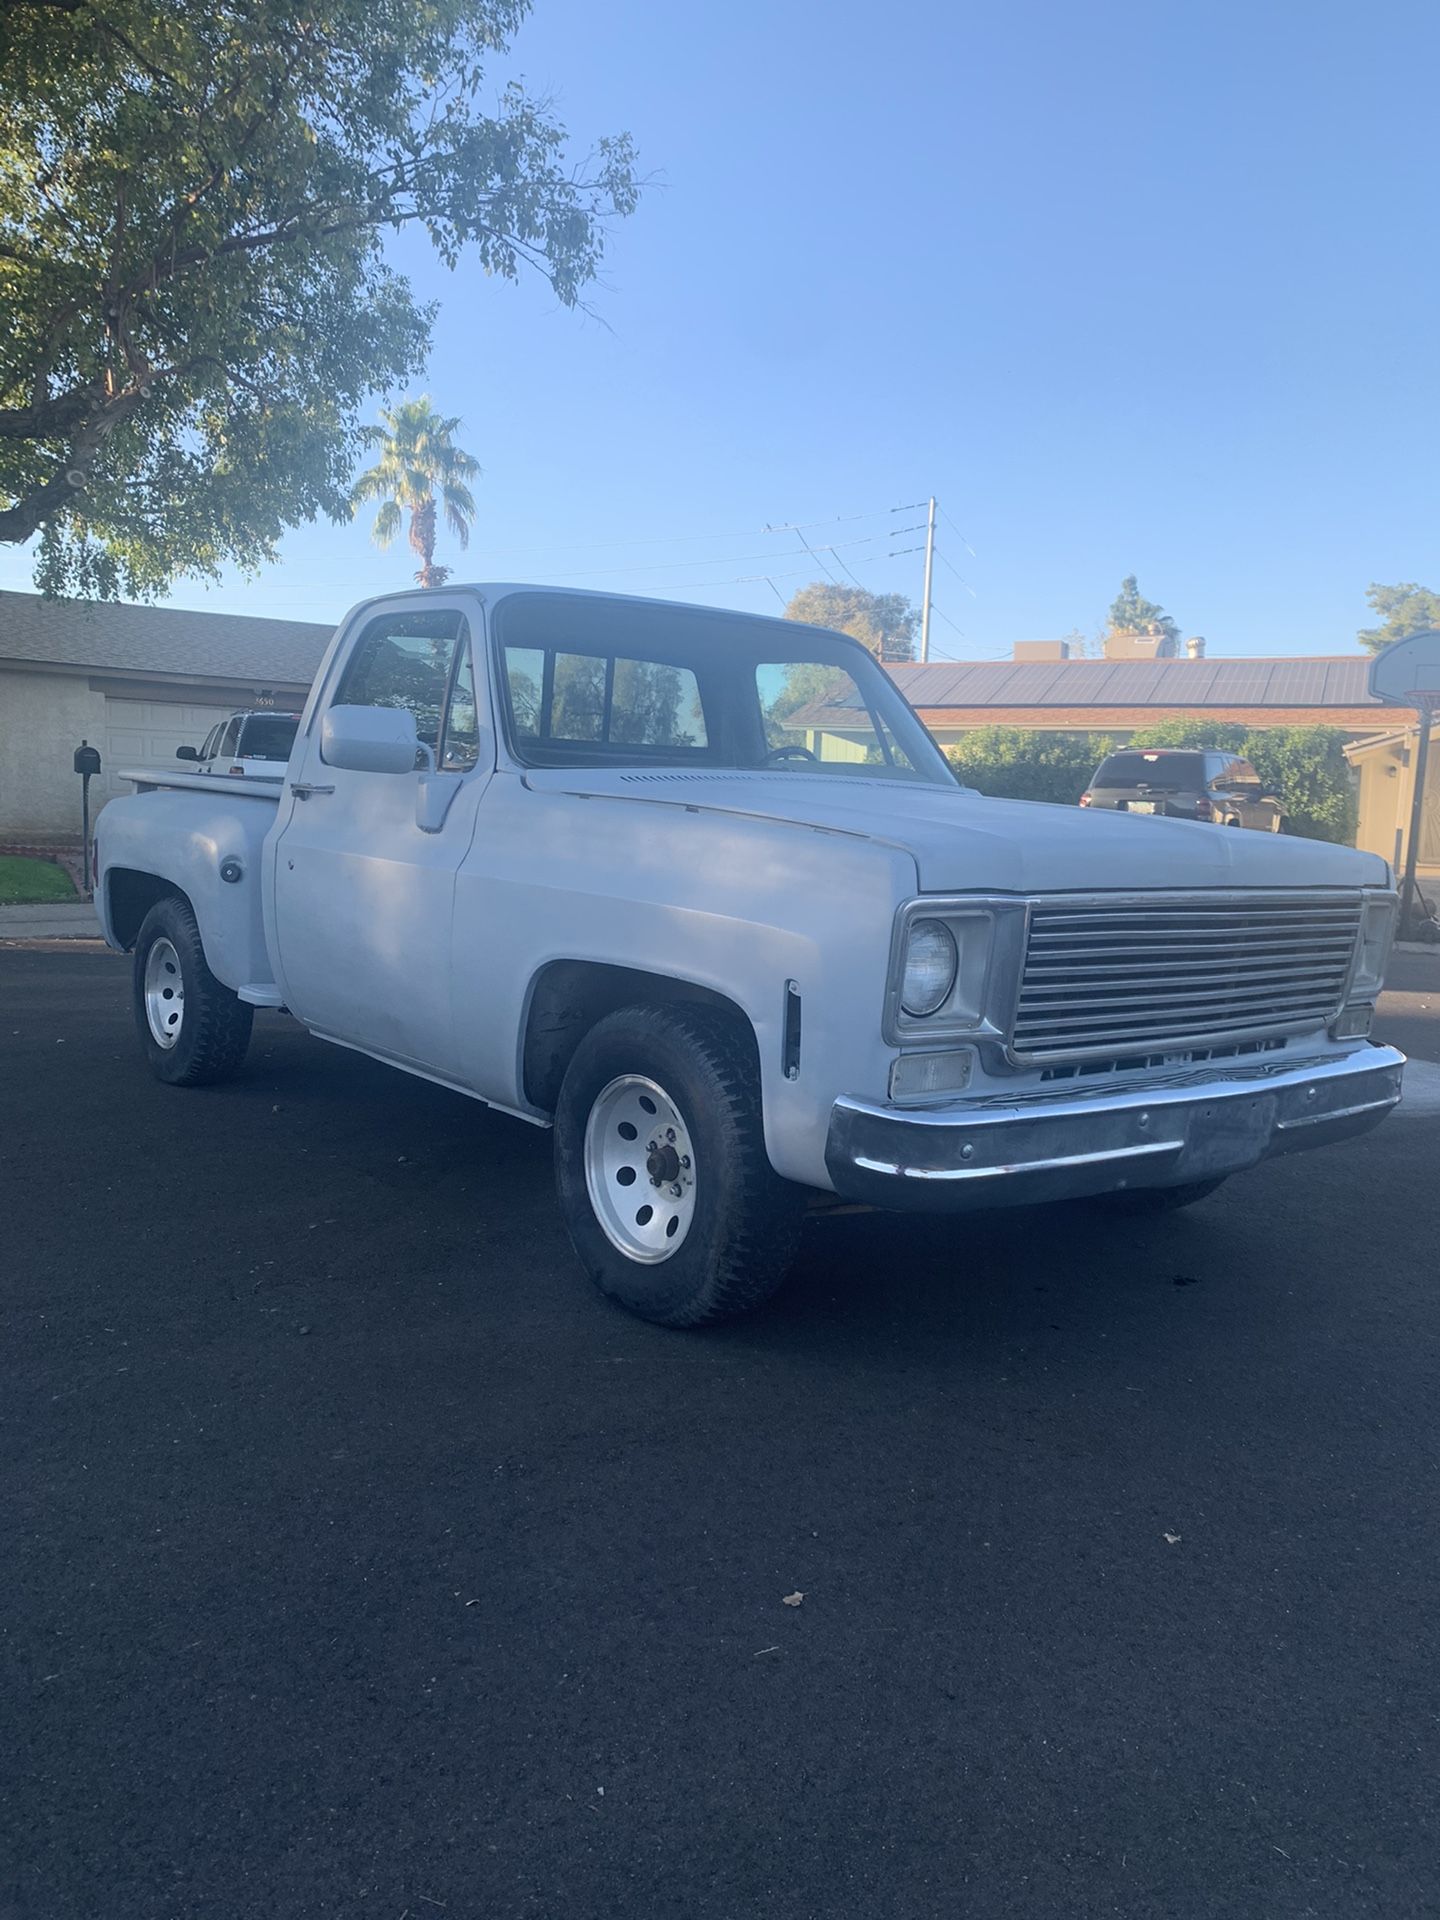 1978 Chevy short bed stepside